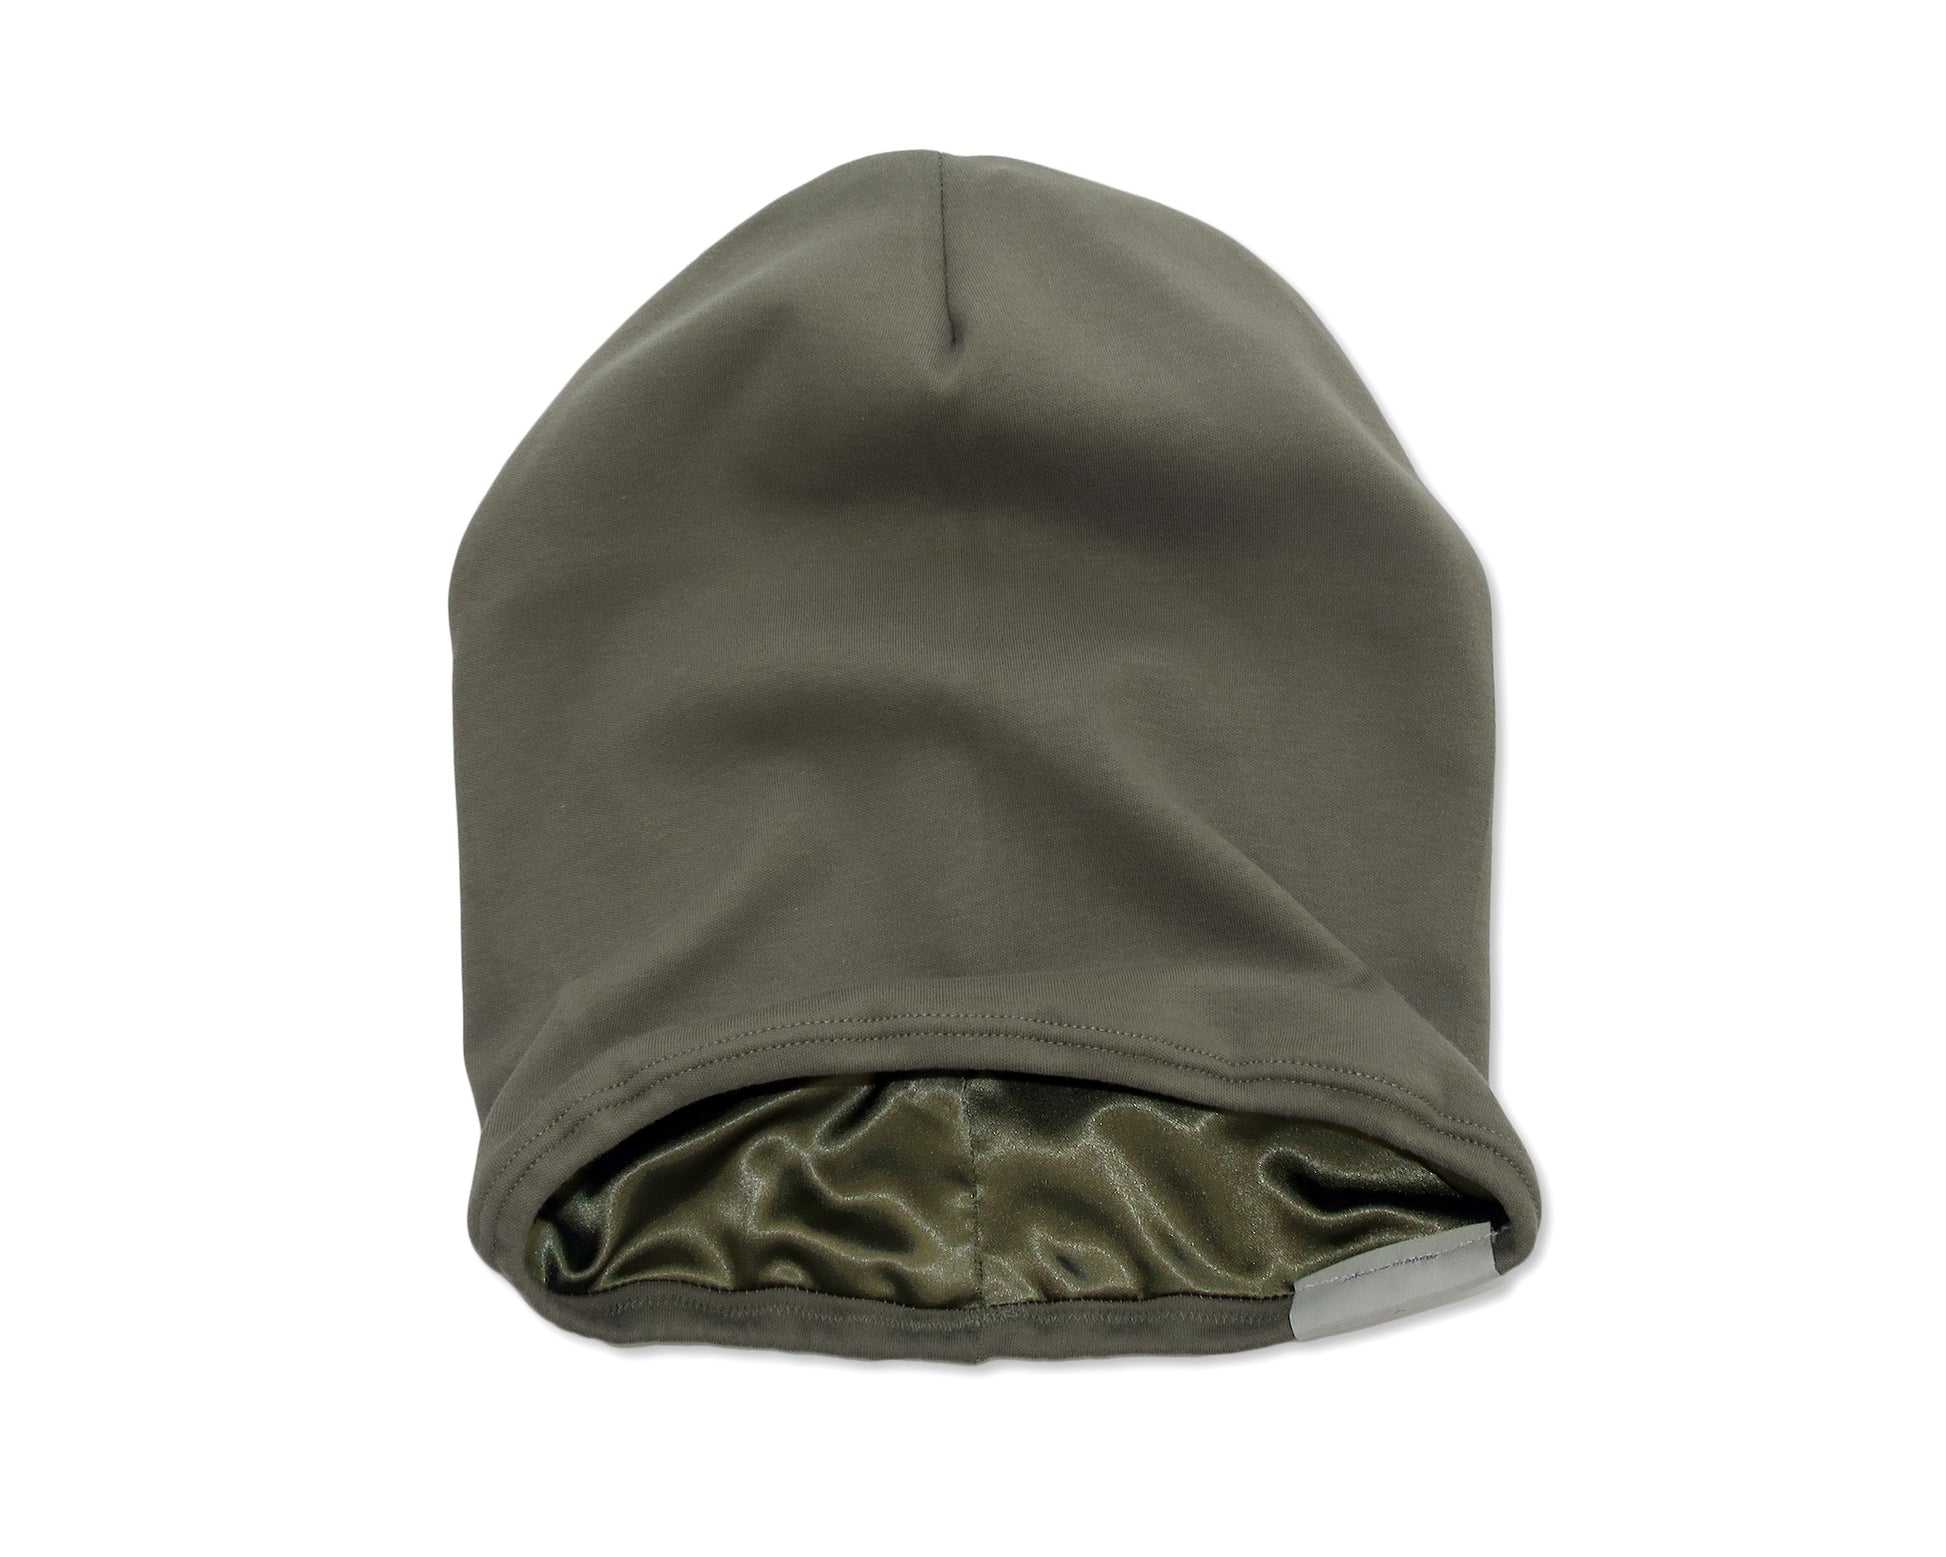 Khaki Satin-Lined Beanie for Women and Men - Soft and Warm Beanie with Satin Lining to Protect Hair